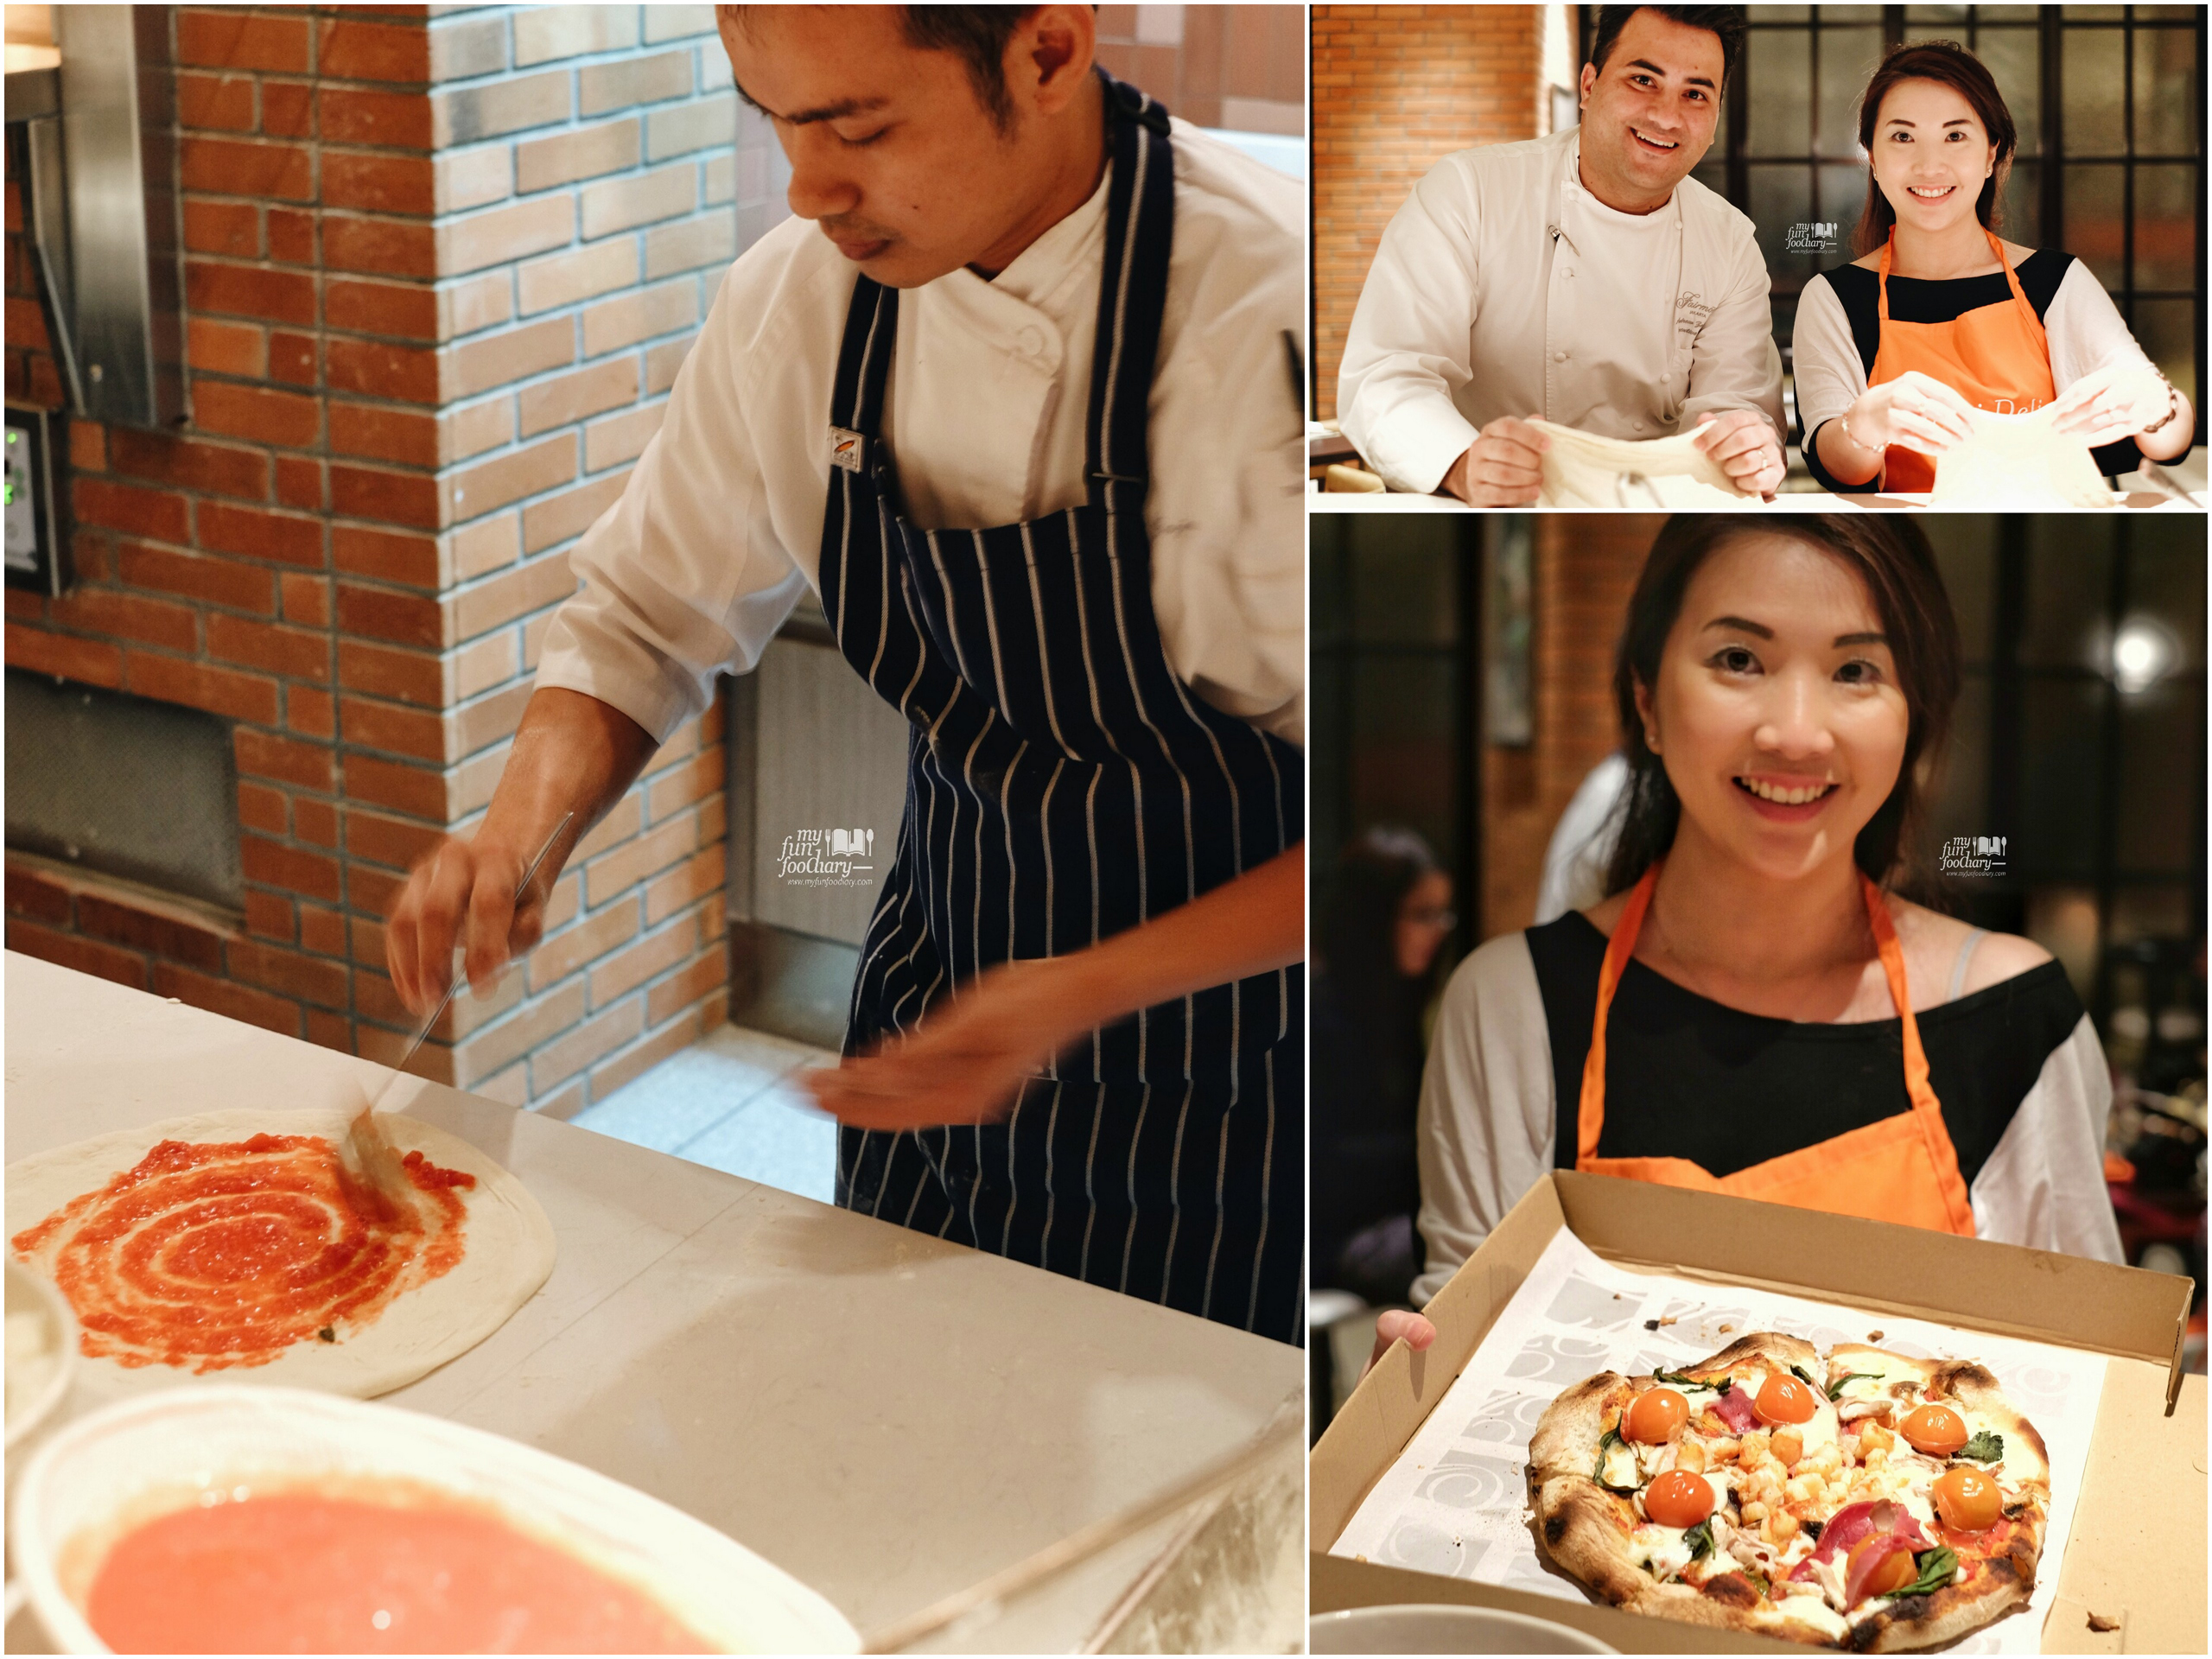 Me and Chef Andrew in Pizza Making Session together with Chef Gozali - by Myfunfoodiary